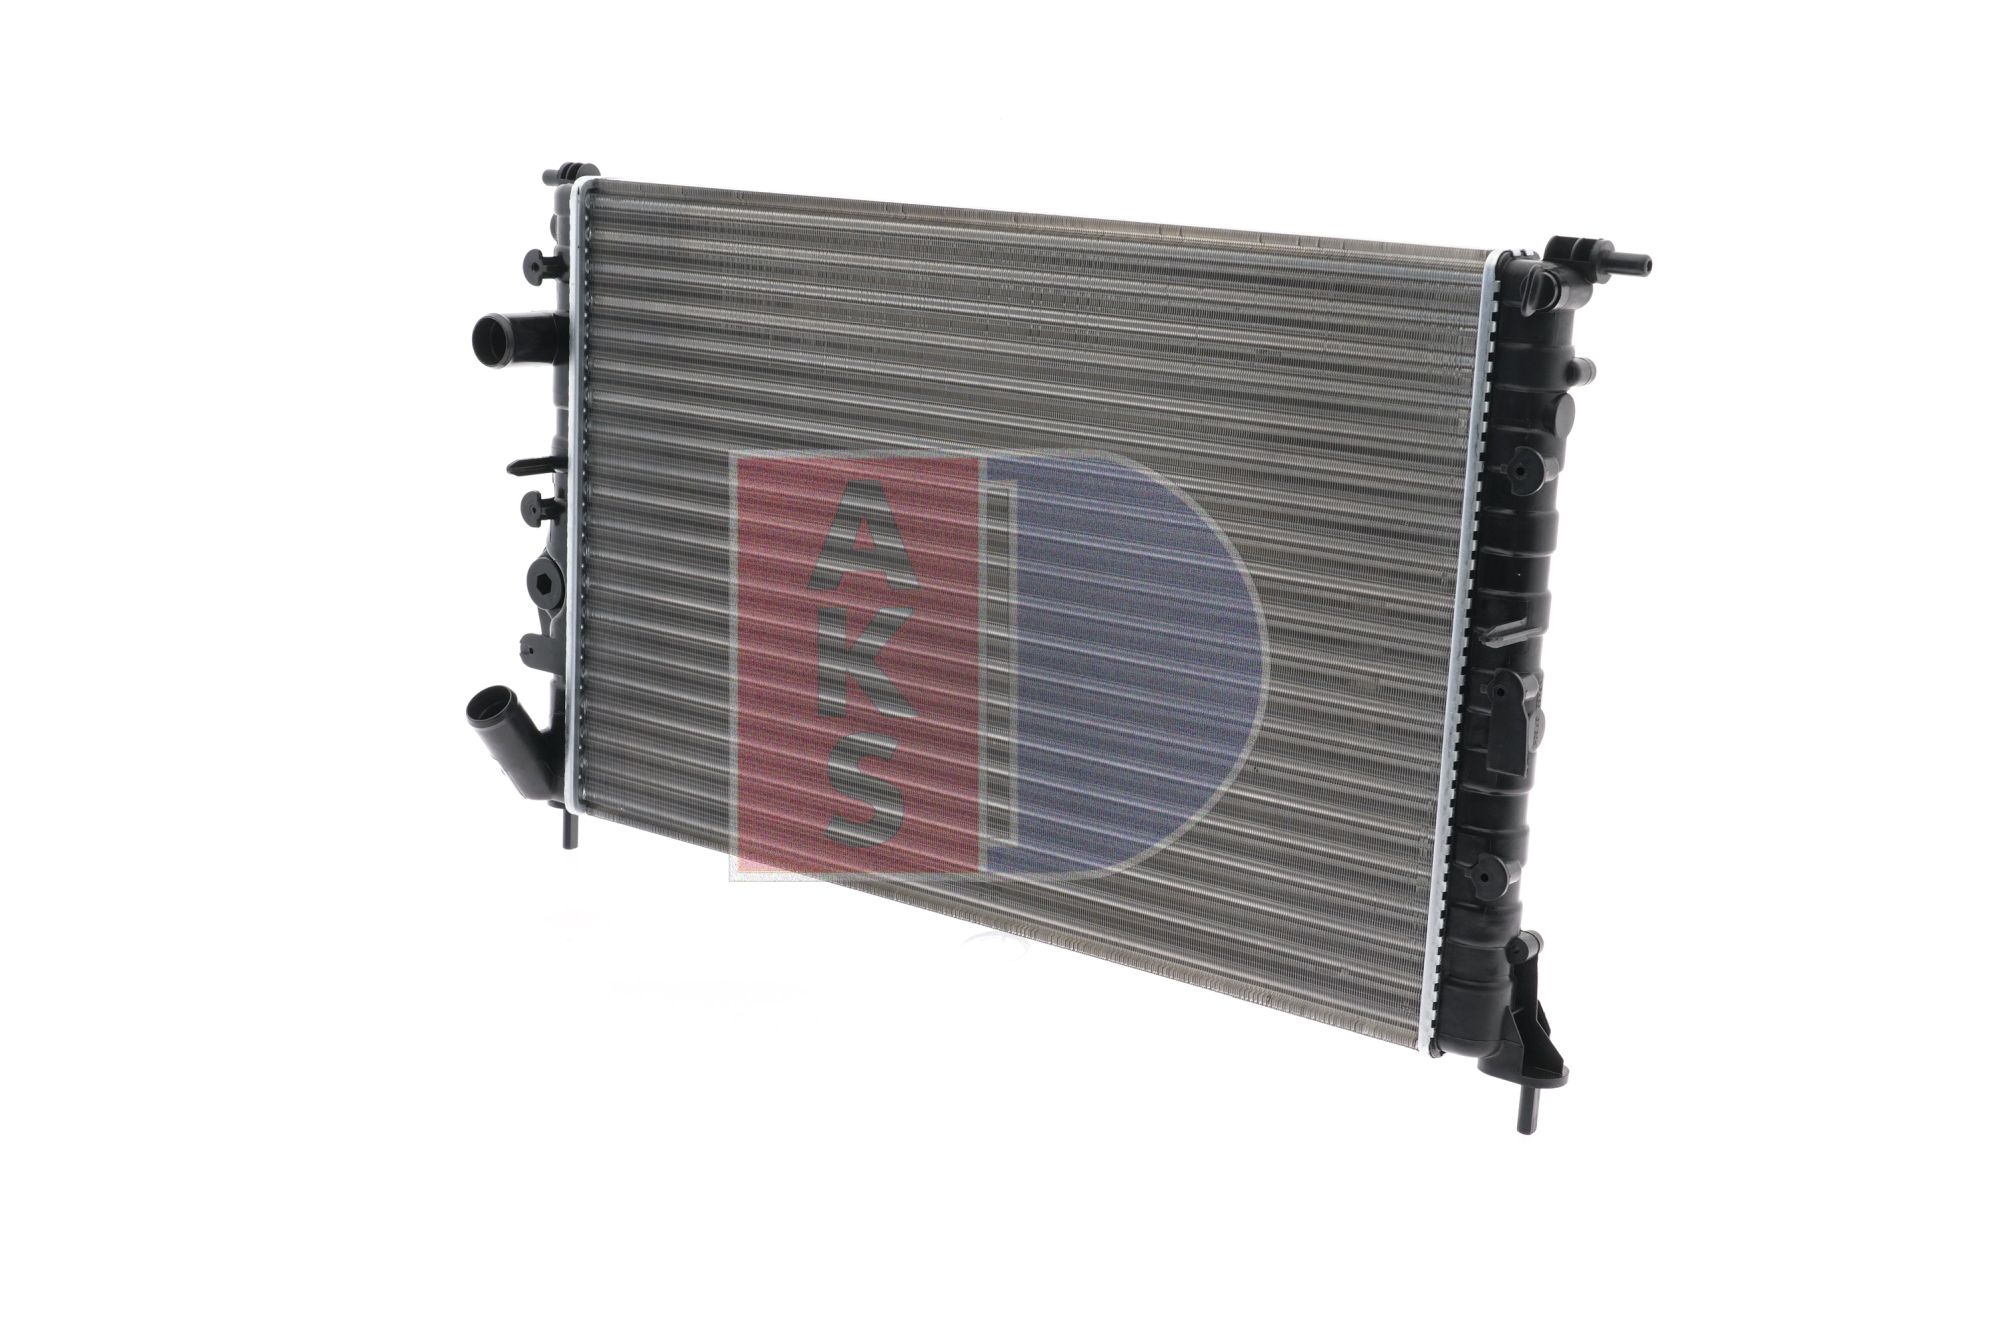 AKS DASIS 180290N Engine radiator 570 x 377 x 28 mm, Mechanically jointed cooling fins